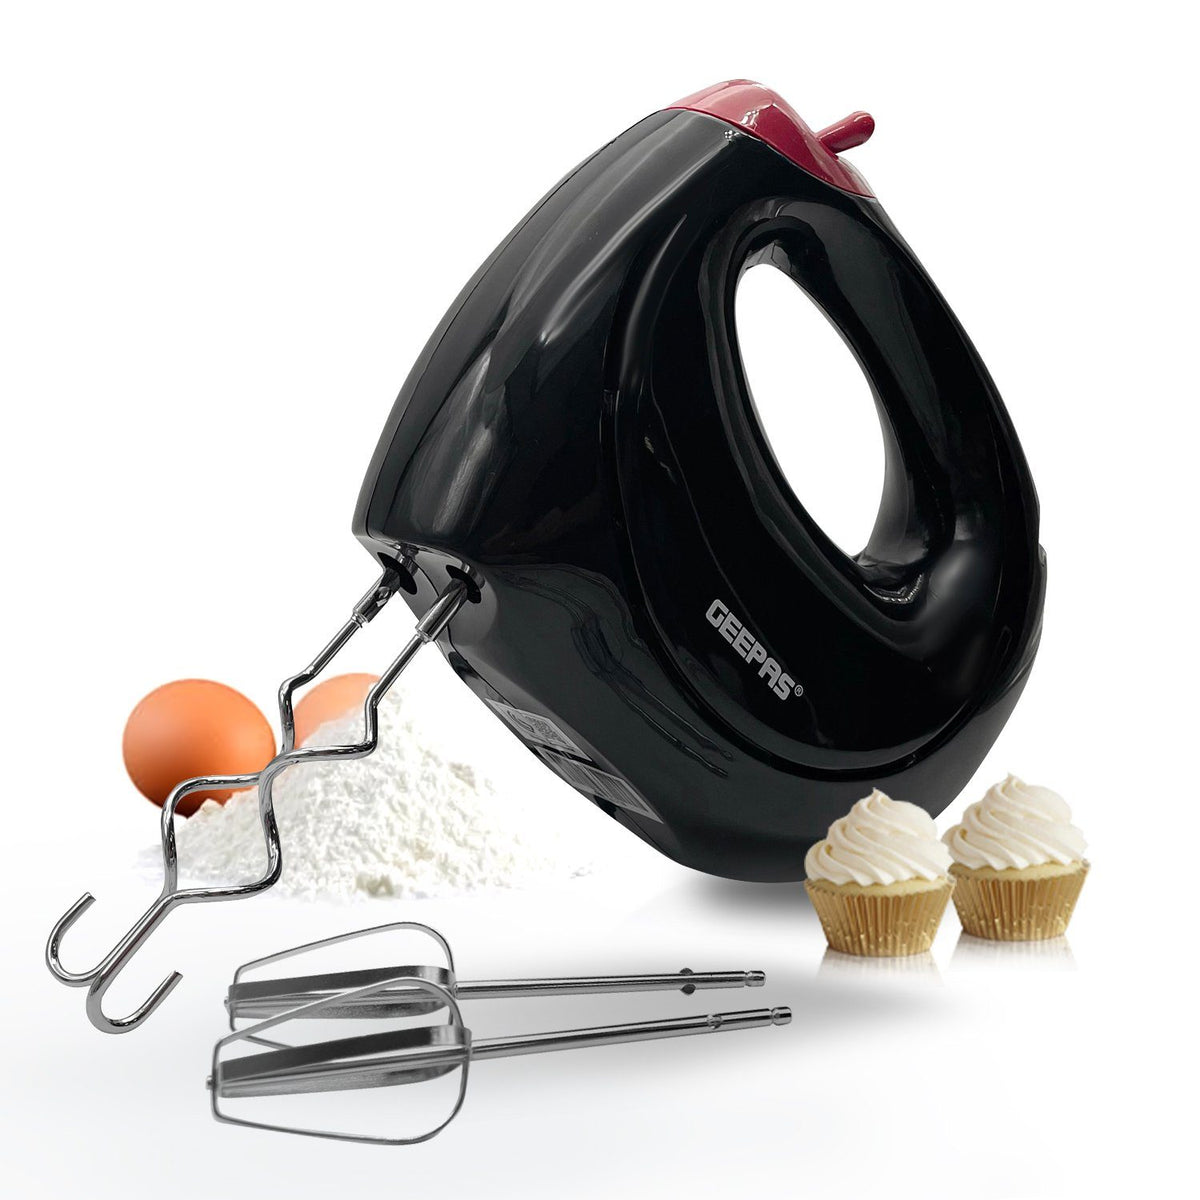 150W Hand Mixer Hand Mixer Geepas | For you. For life. 